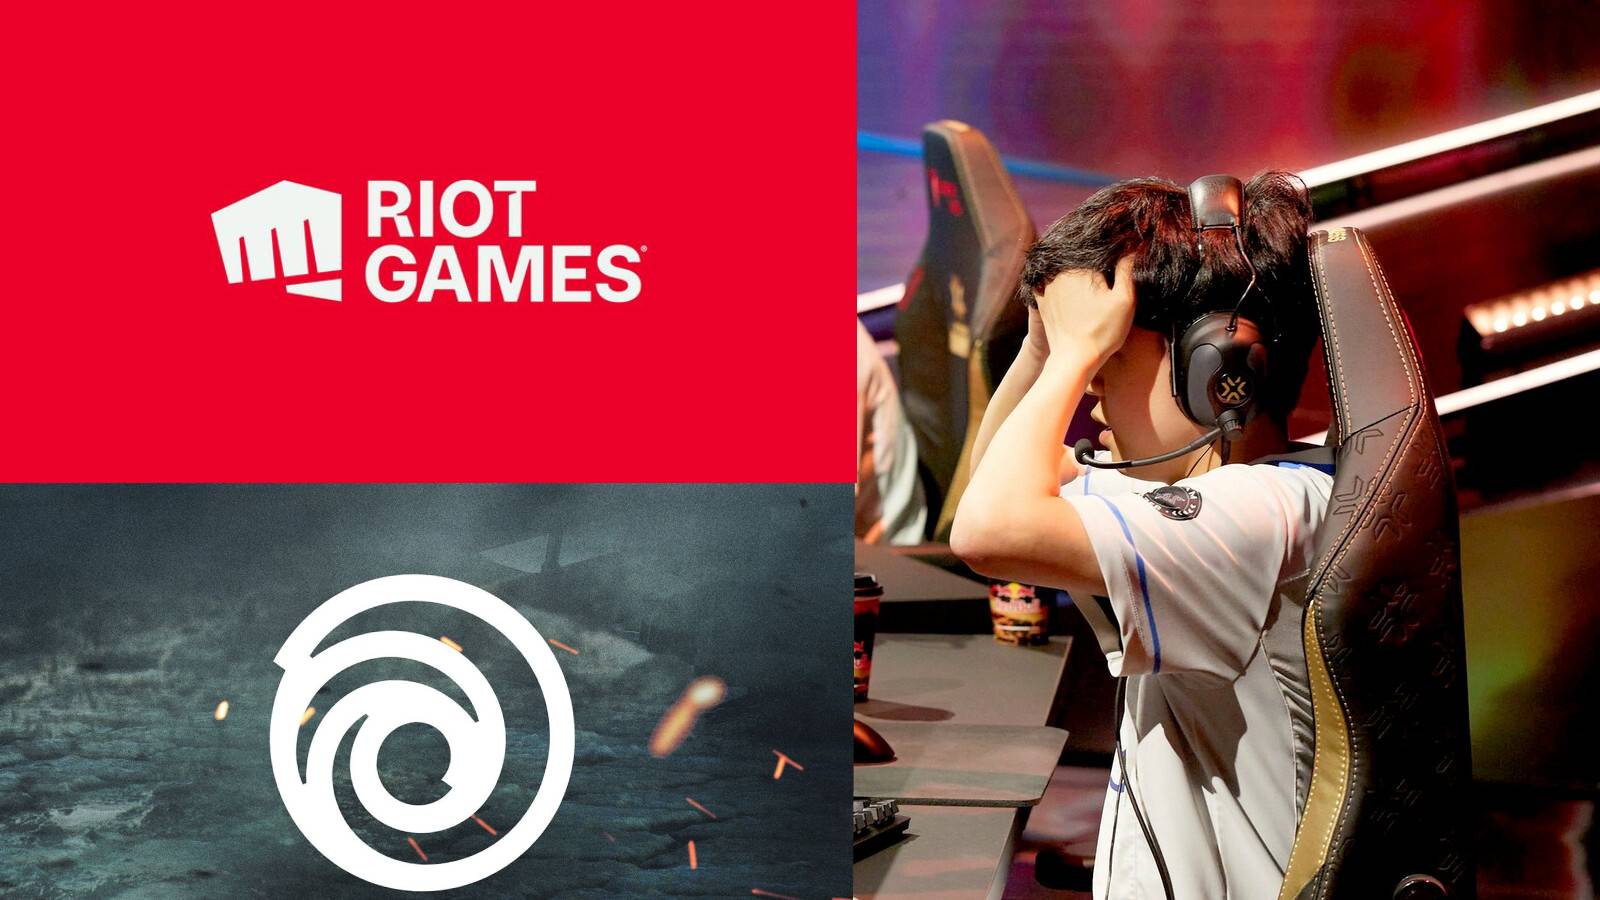 Ubisoft Teams Up With Riot Games To Tackle Online Toxicity